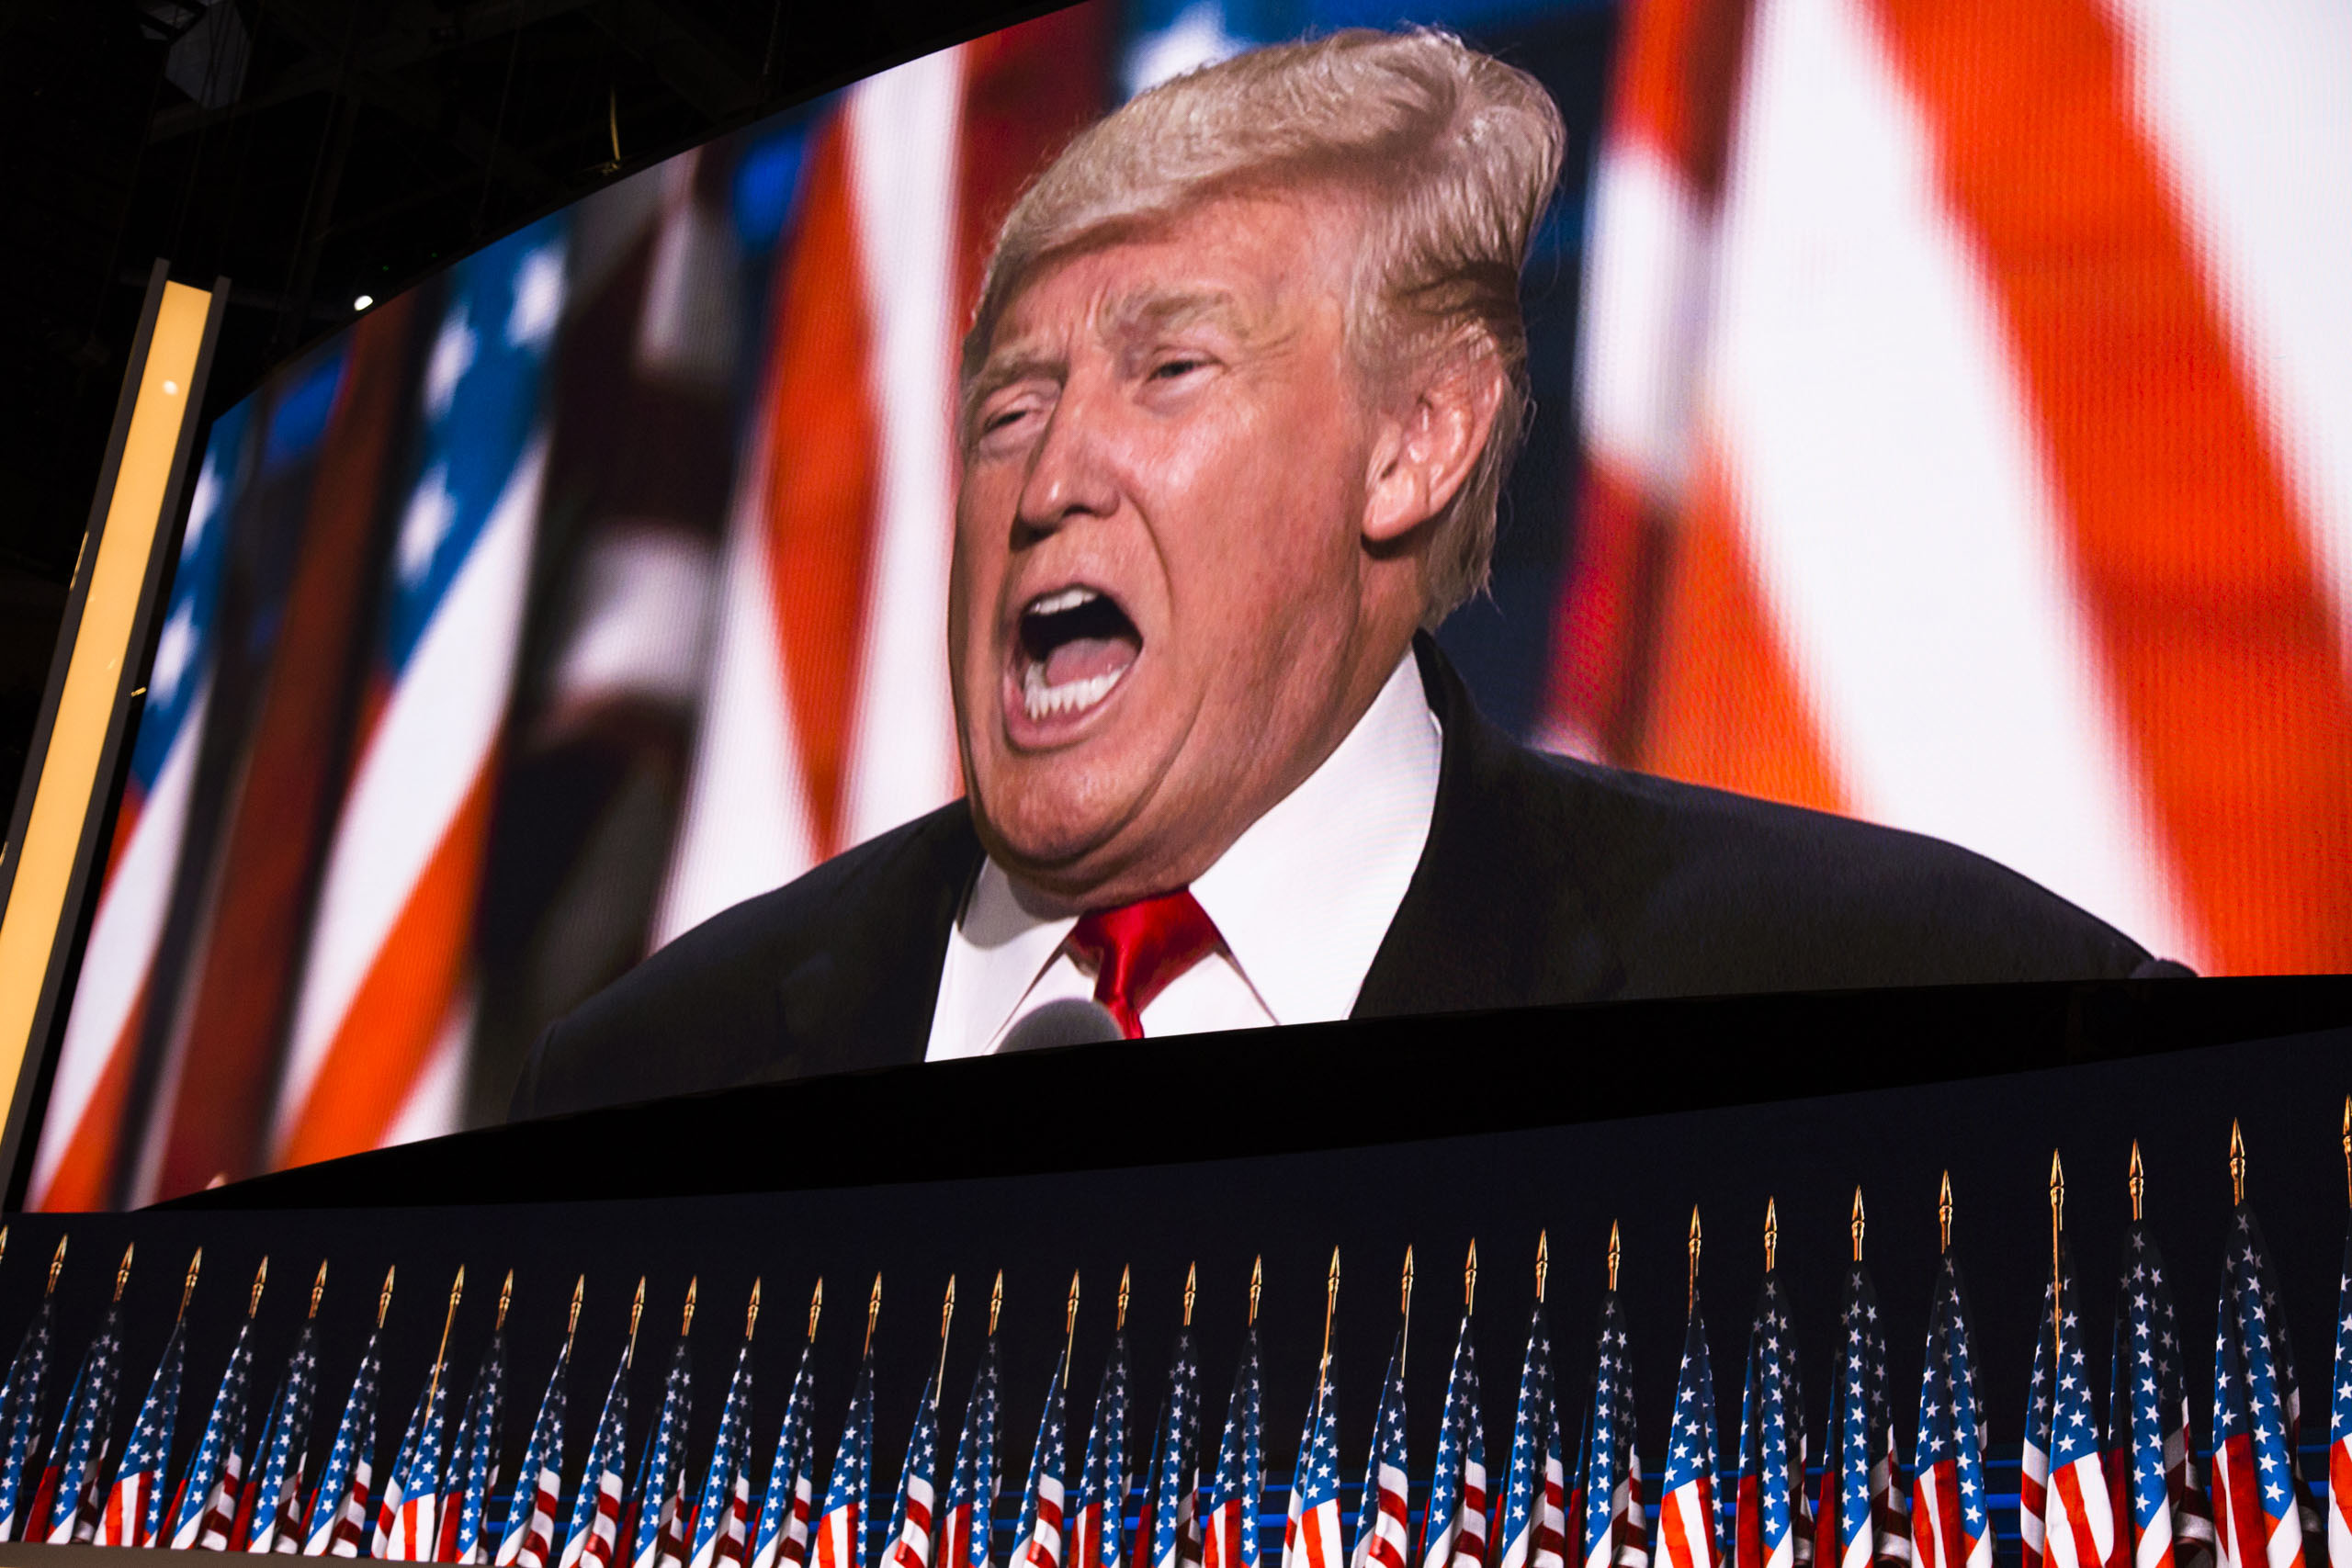 Donald Trump delivers a speech during the evening session on the fourth day of the Republican National Convention at the Quicken Loans Arena in Cleveland, Ohio, on July 21, 2016. (Landon Nordeman for TIME)